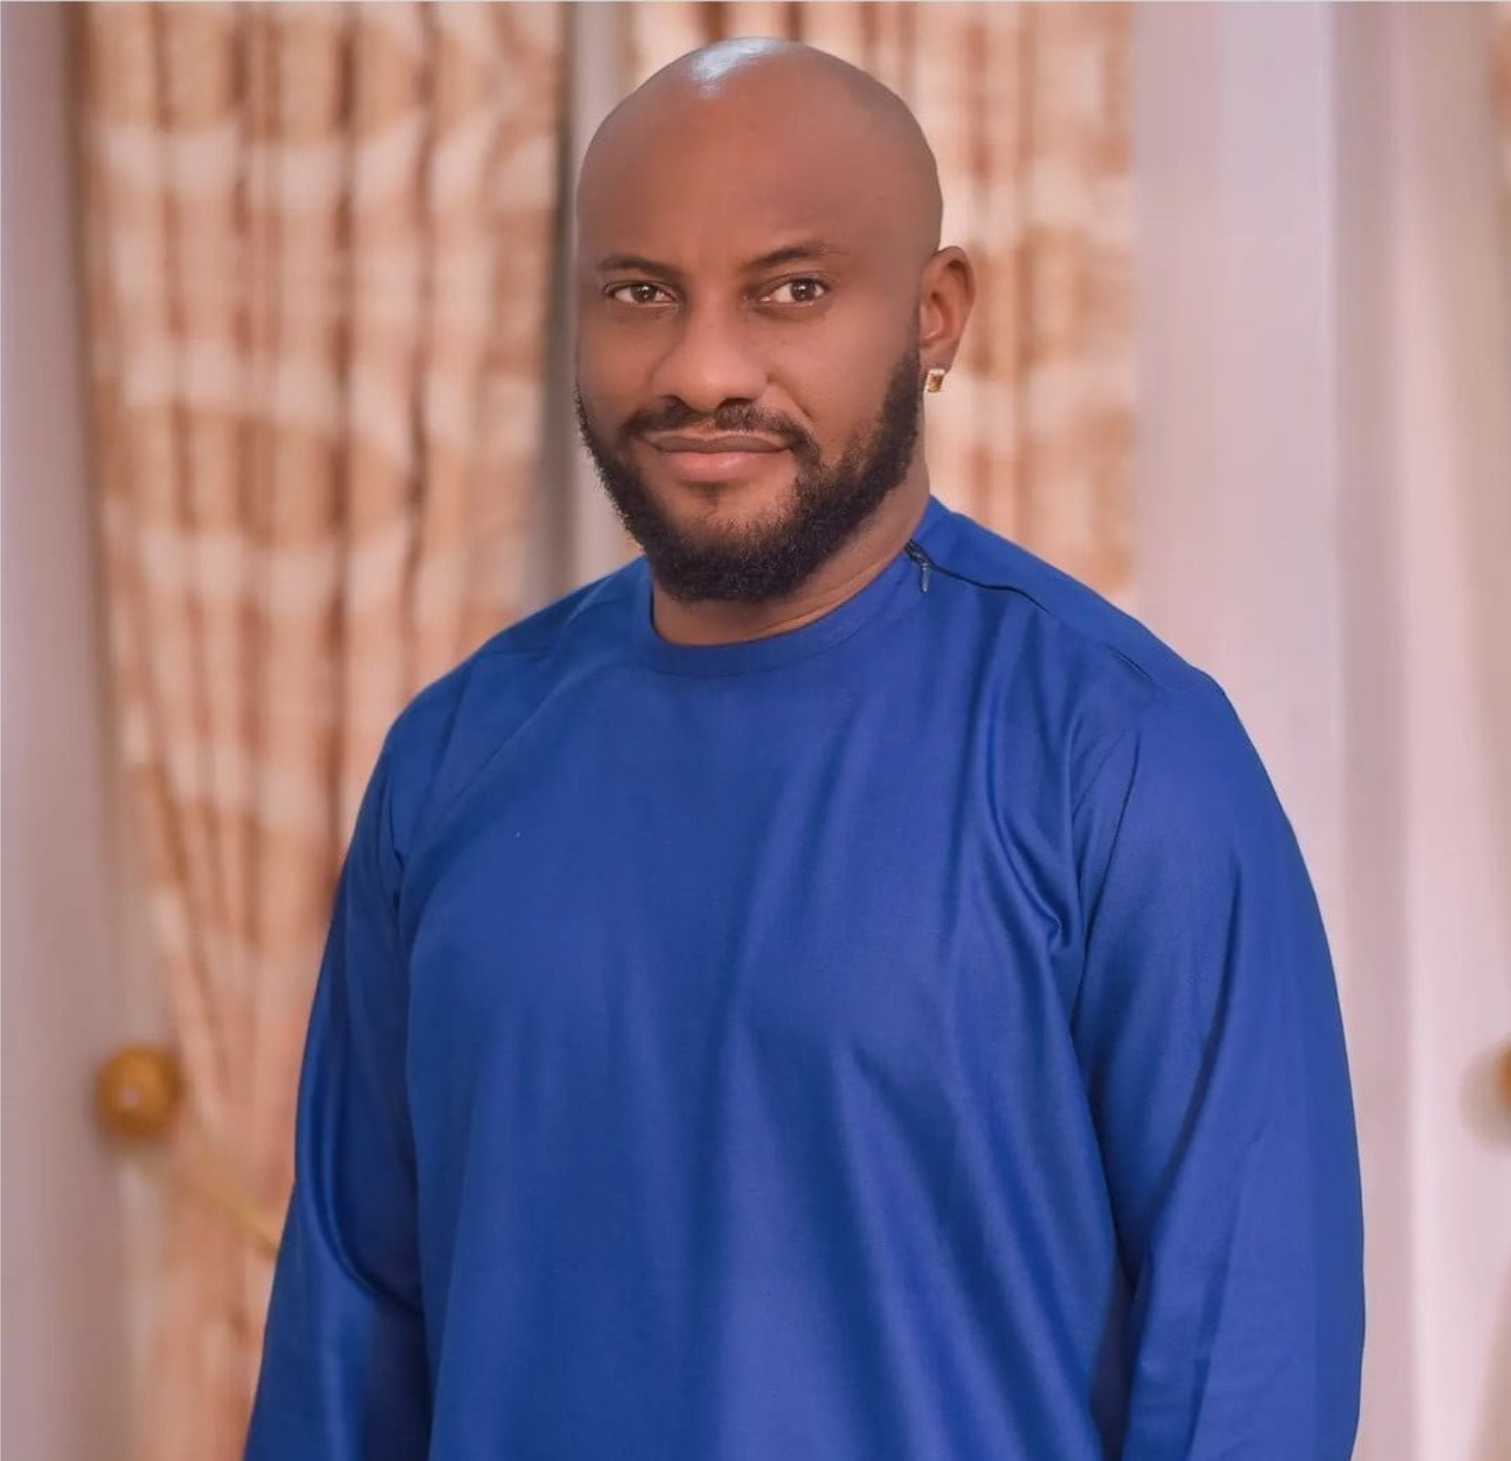 God grant Tinubu long life to deliver Nigerians from suffering – Yul Edochie